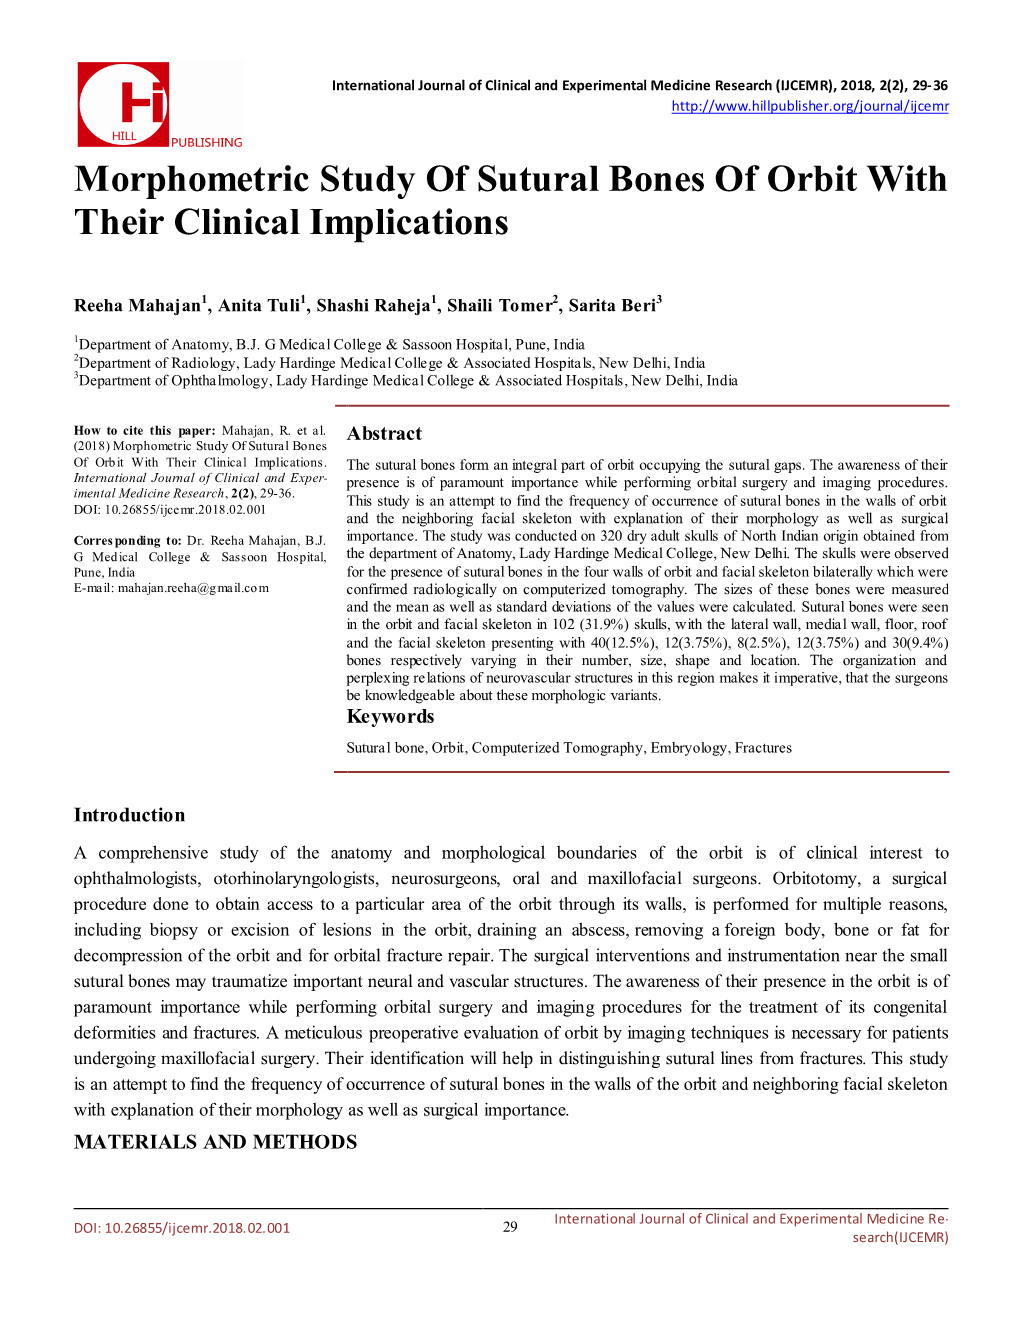 Morphometric Study of Sutural Bones of Orbit with Their Clinical Implications